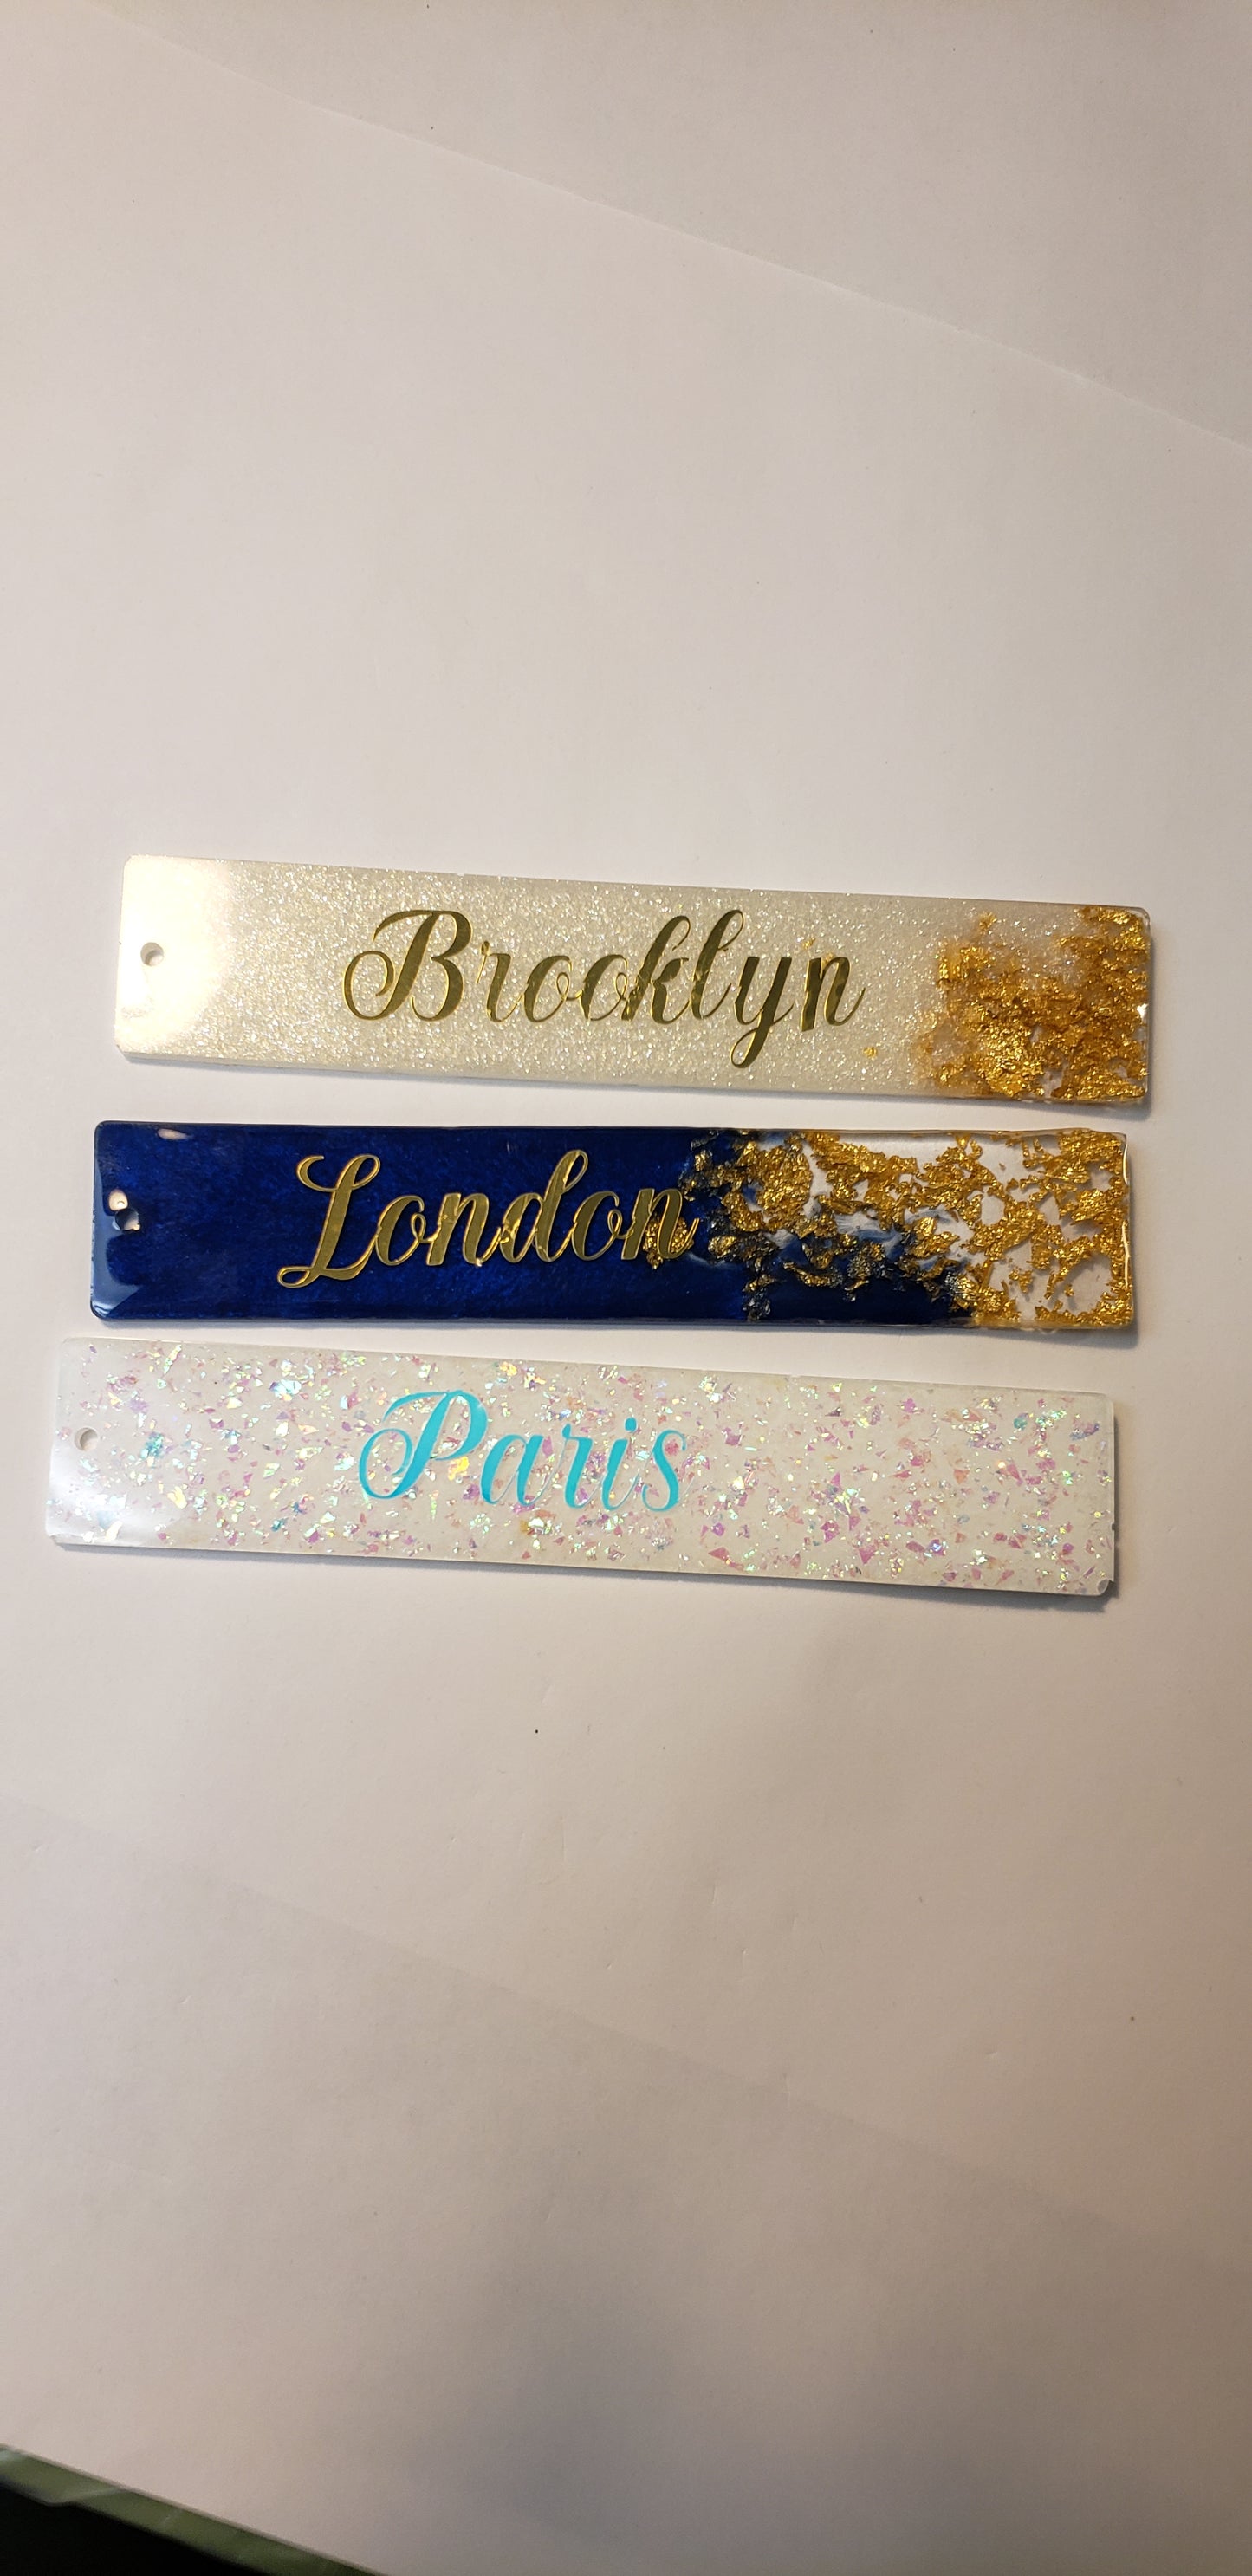 Personalized resin Gift Set / bridesmaids gift sets/ Gift sets